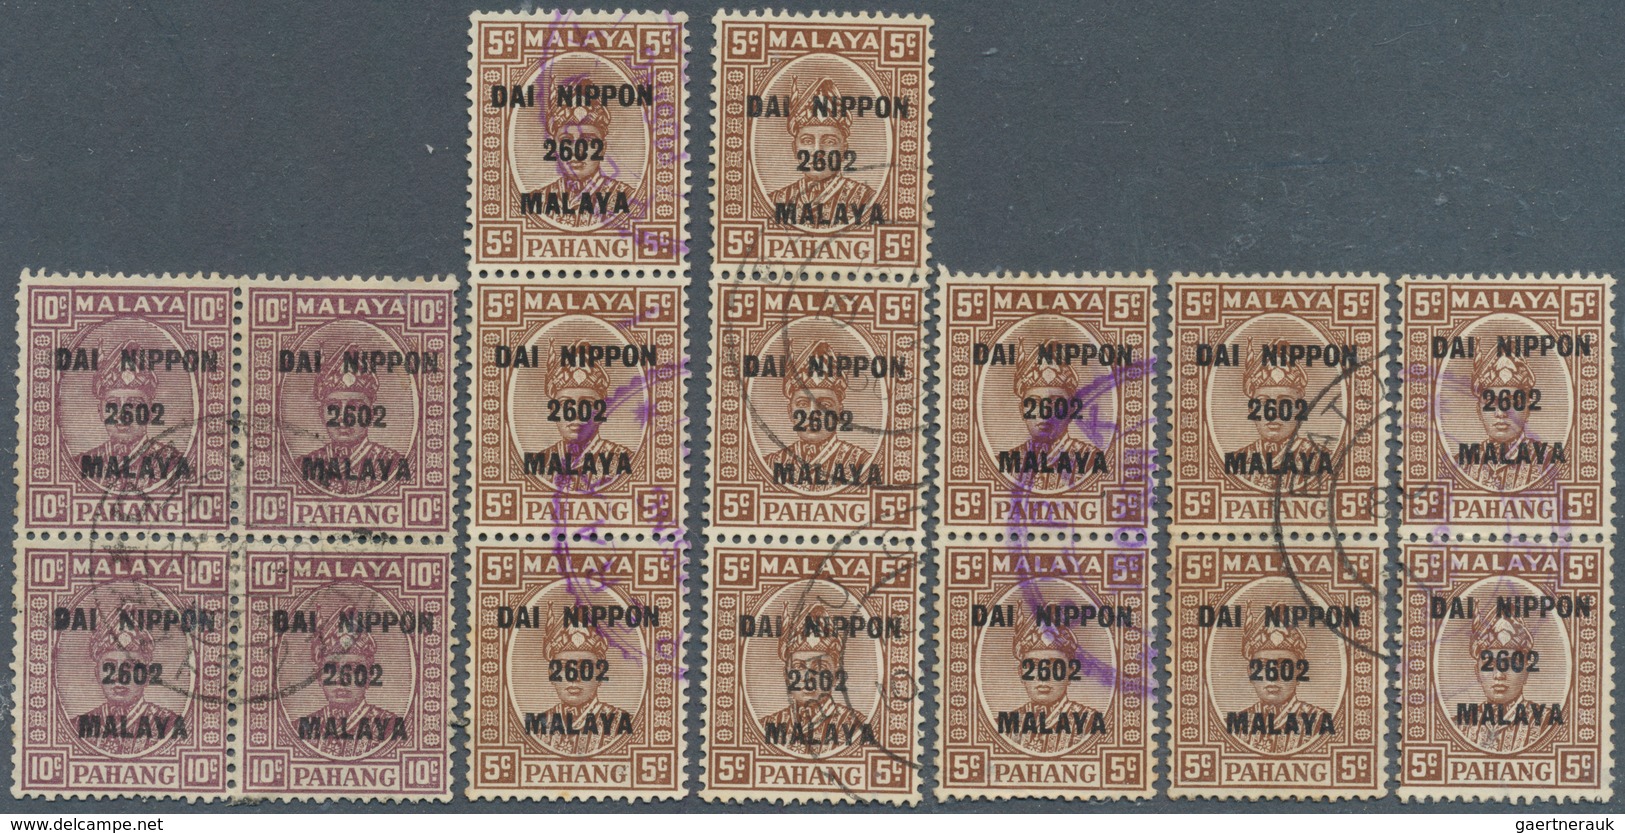 Japanische Besetzung  WK II - Malaya: General issues, Pahang, 1942, ovpts. T16 resp. T2 mint and use